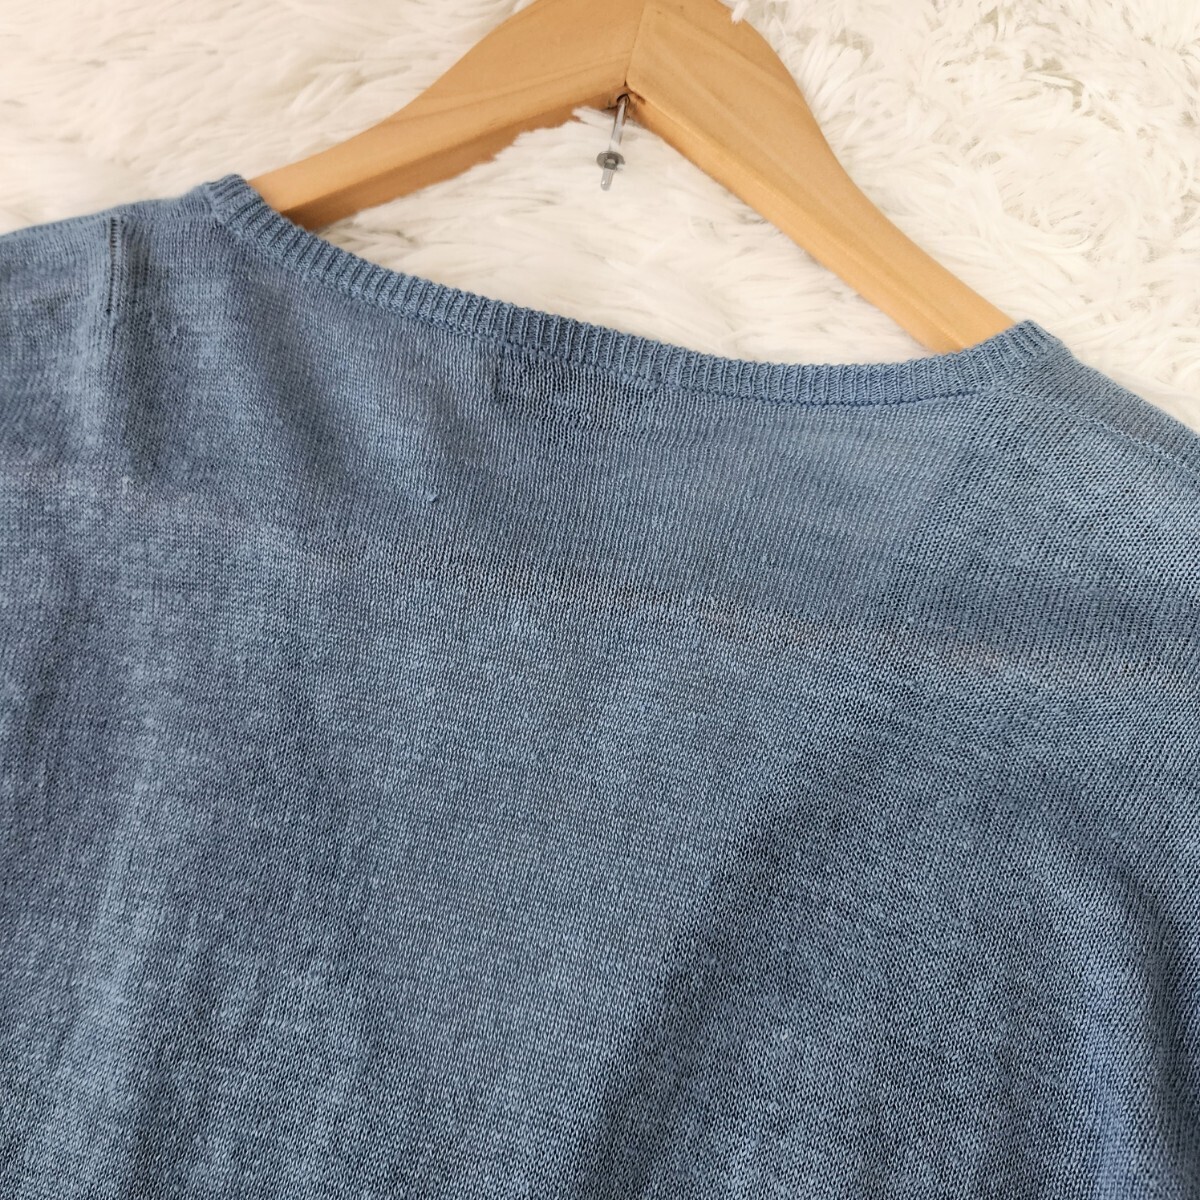  rare XL size linen100% Paul Smith cardigan [ refreshing . feather woven ]Paul Smith COLLECTION summer knitted men's sombreness blue group thin summer 